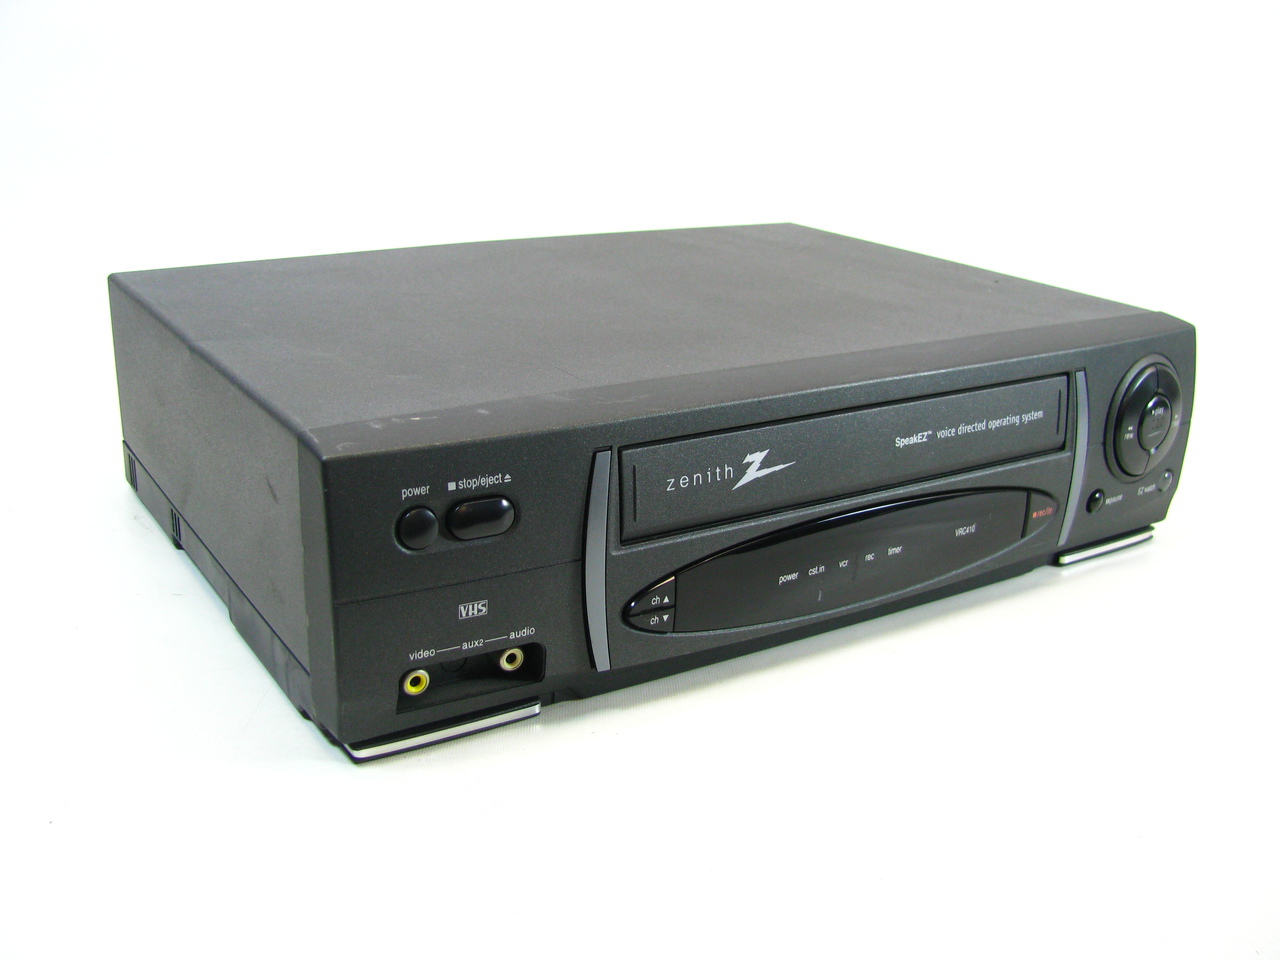 The last new VCR in the world will come out of the factory this month